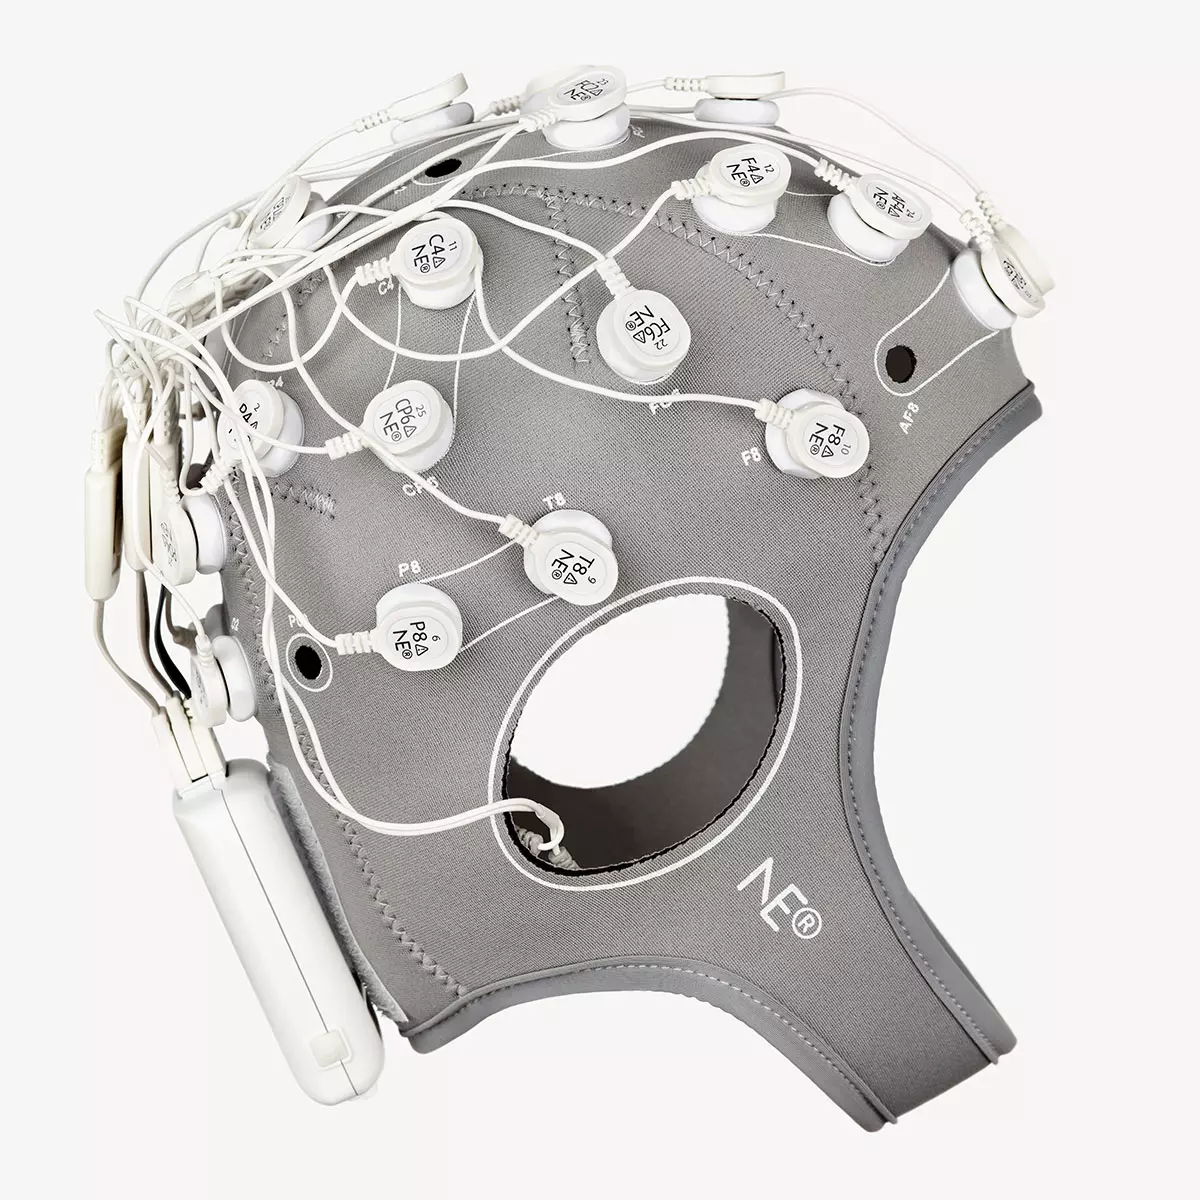 EEG headset with 32 electrodes